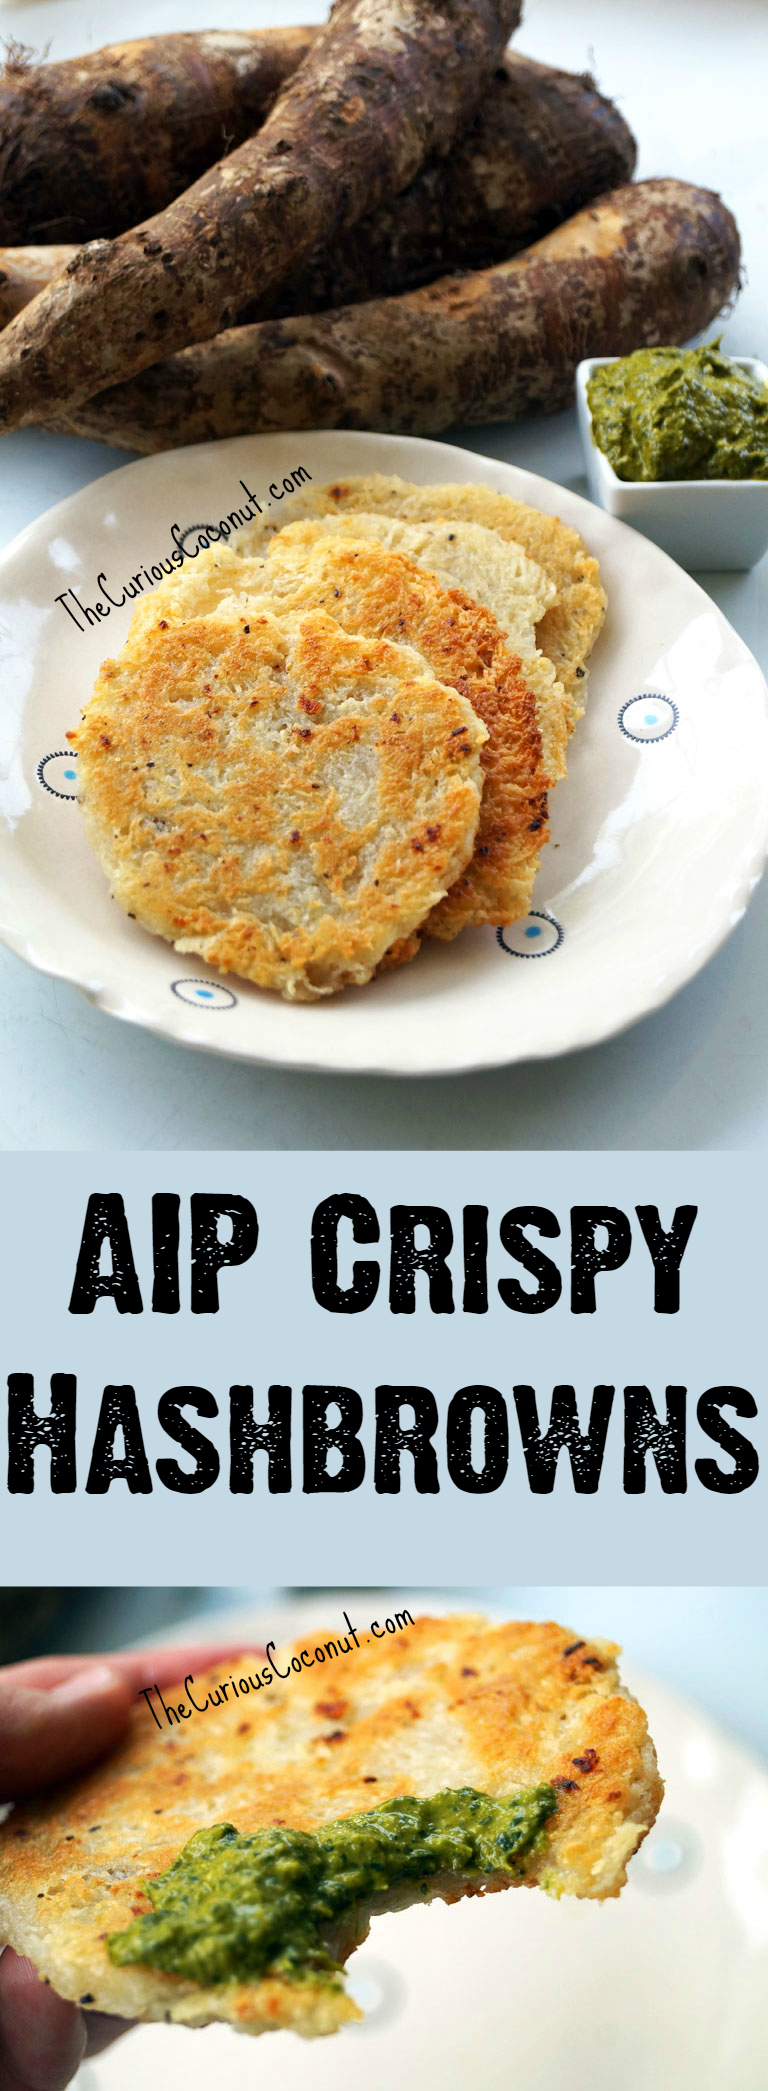 AIP Crispy Hashbrowns - no potatoes, no problem! Easy, nightshade-free, delicious, allergy-friendly // TheCuriousCoconut.com